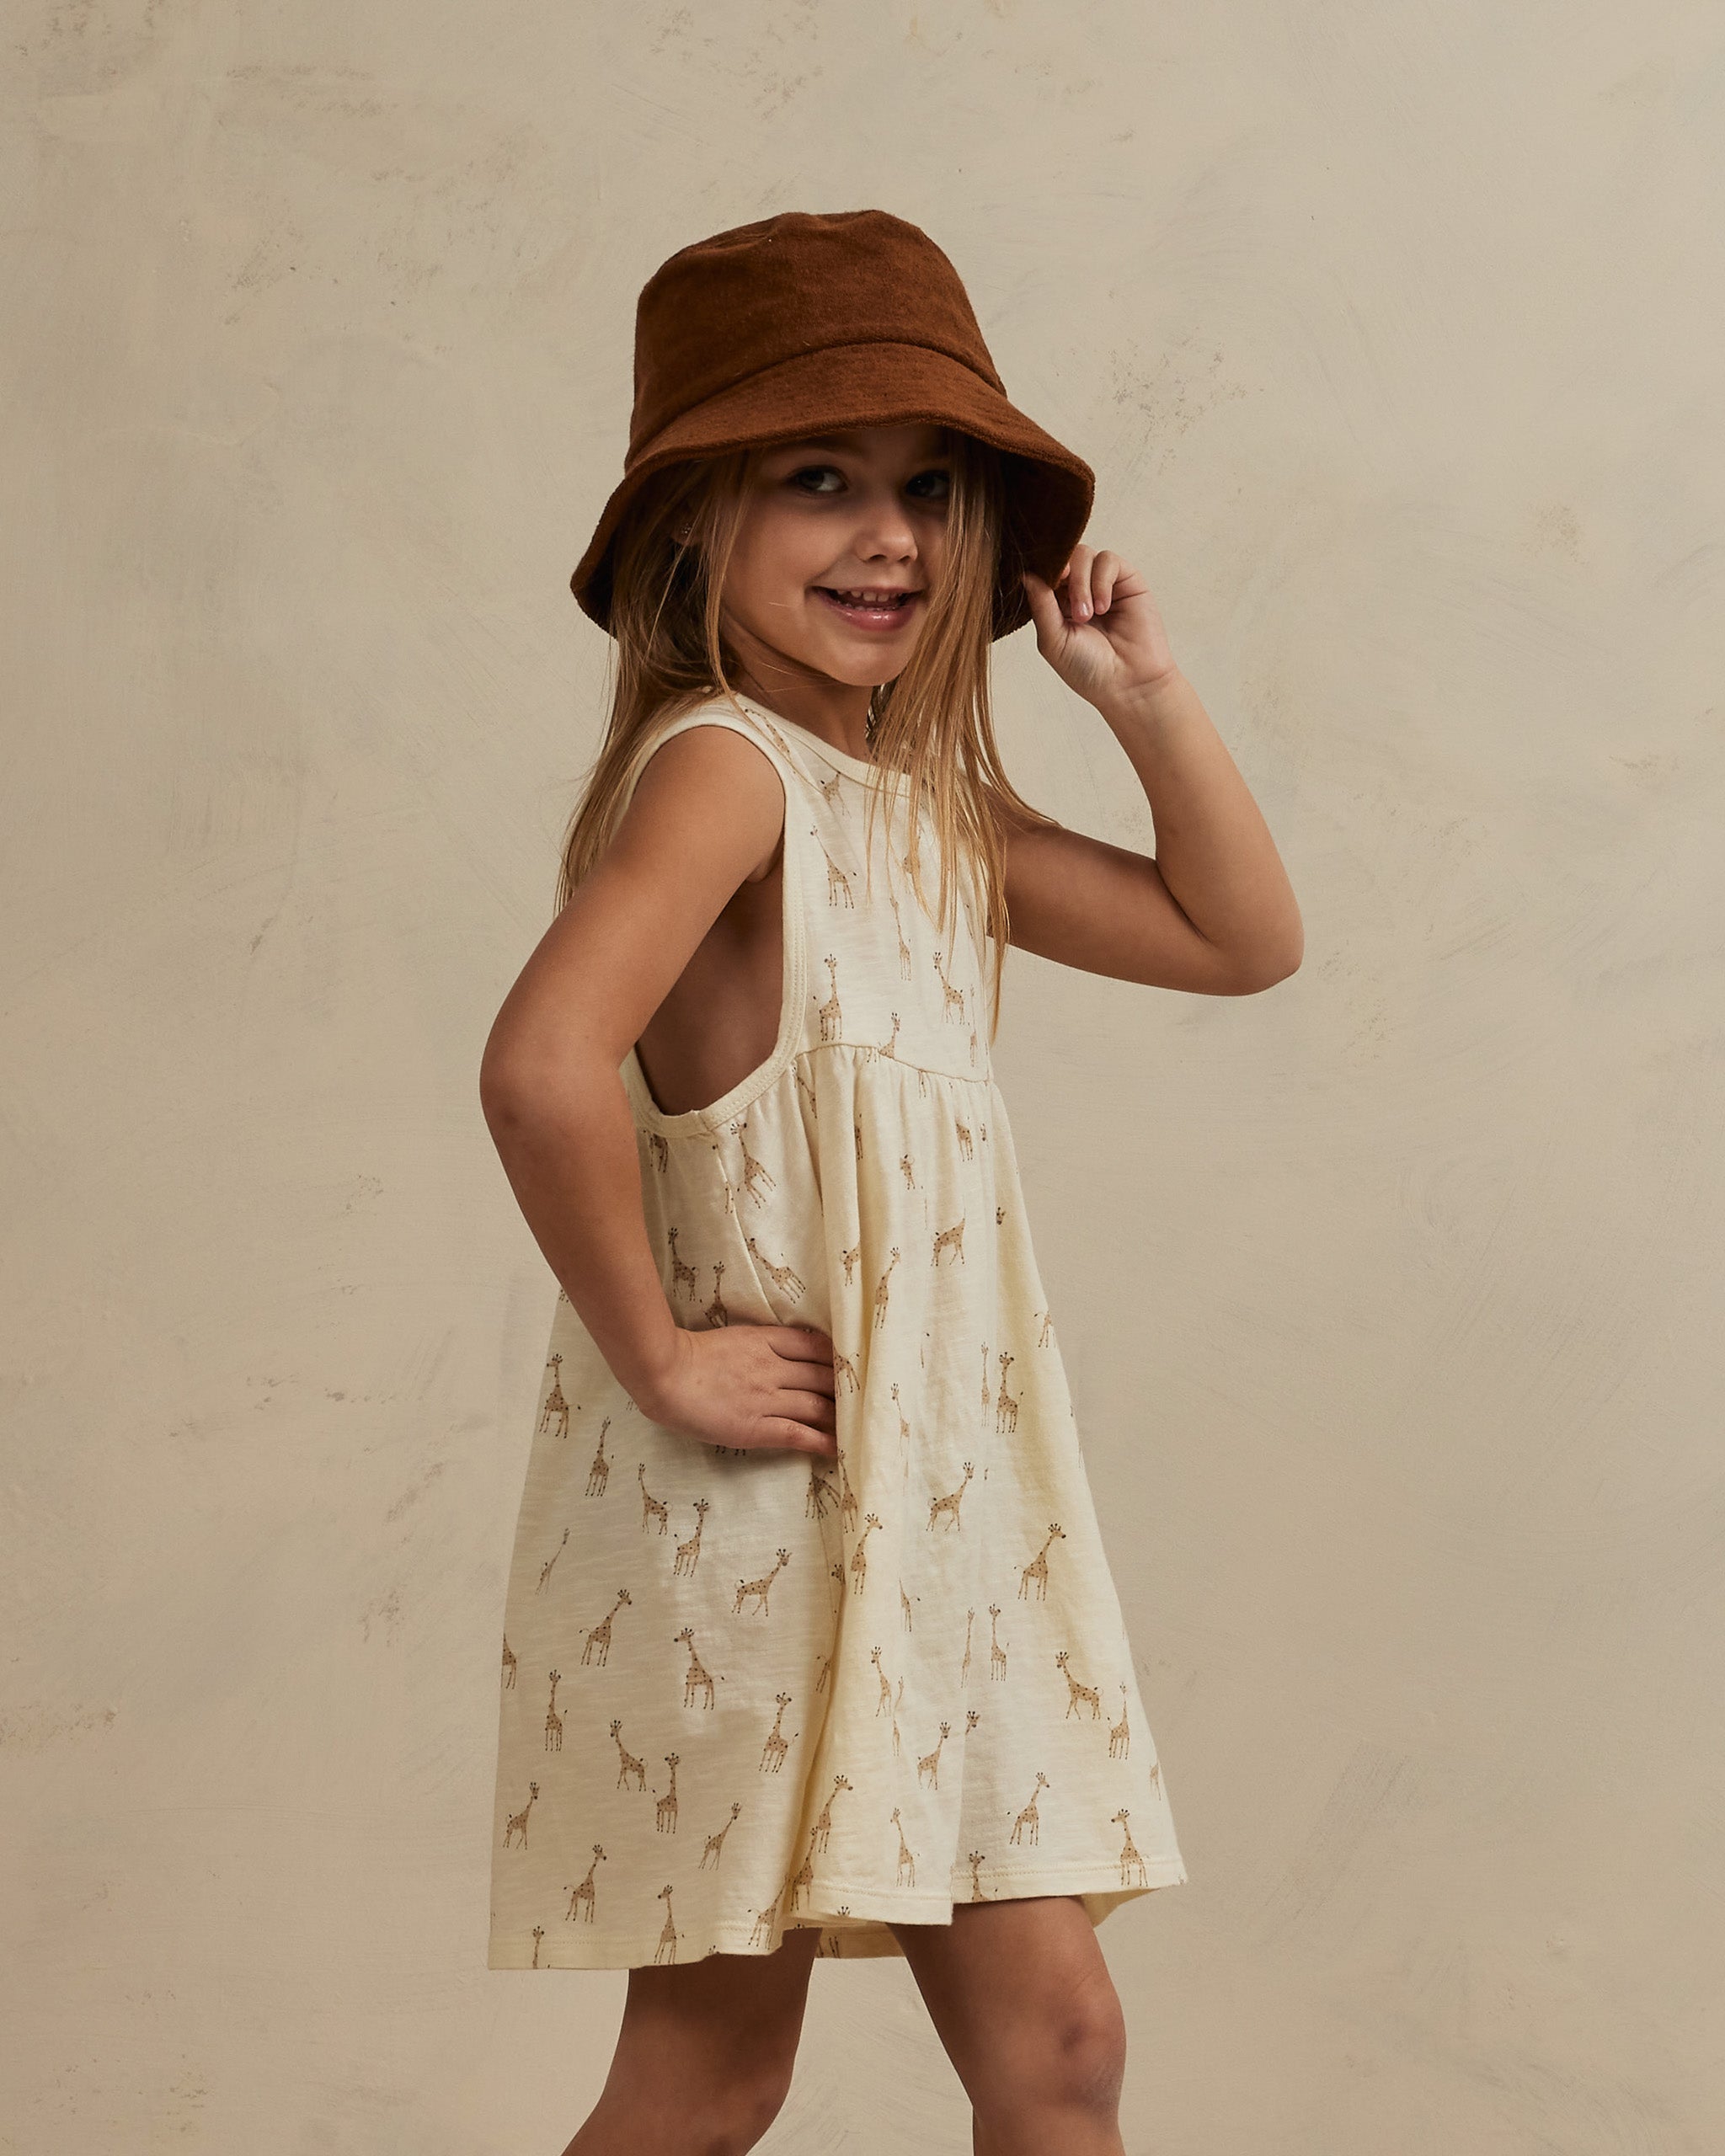 layla mini dress || giraffes - Rylee + Cru | Kids Clothes | Trendy Baby Clothes | Modern Infant Outfits |